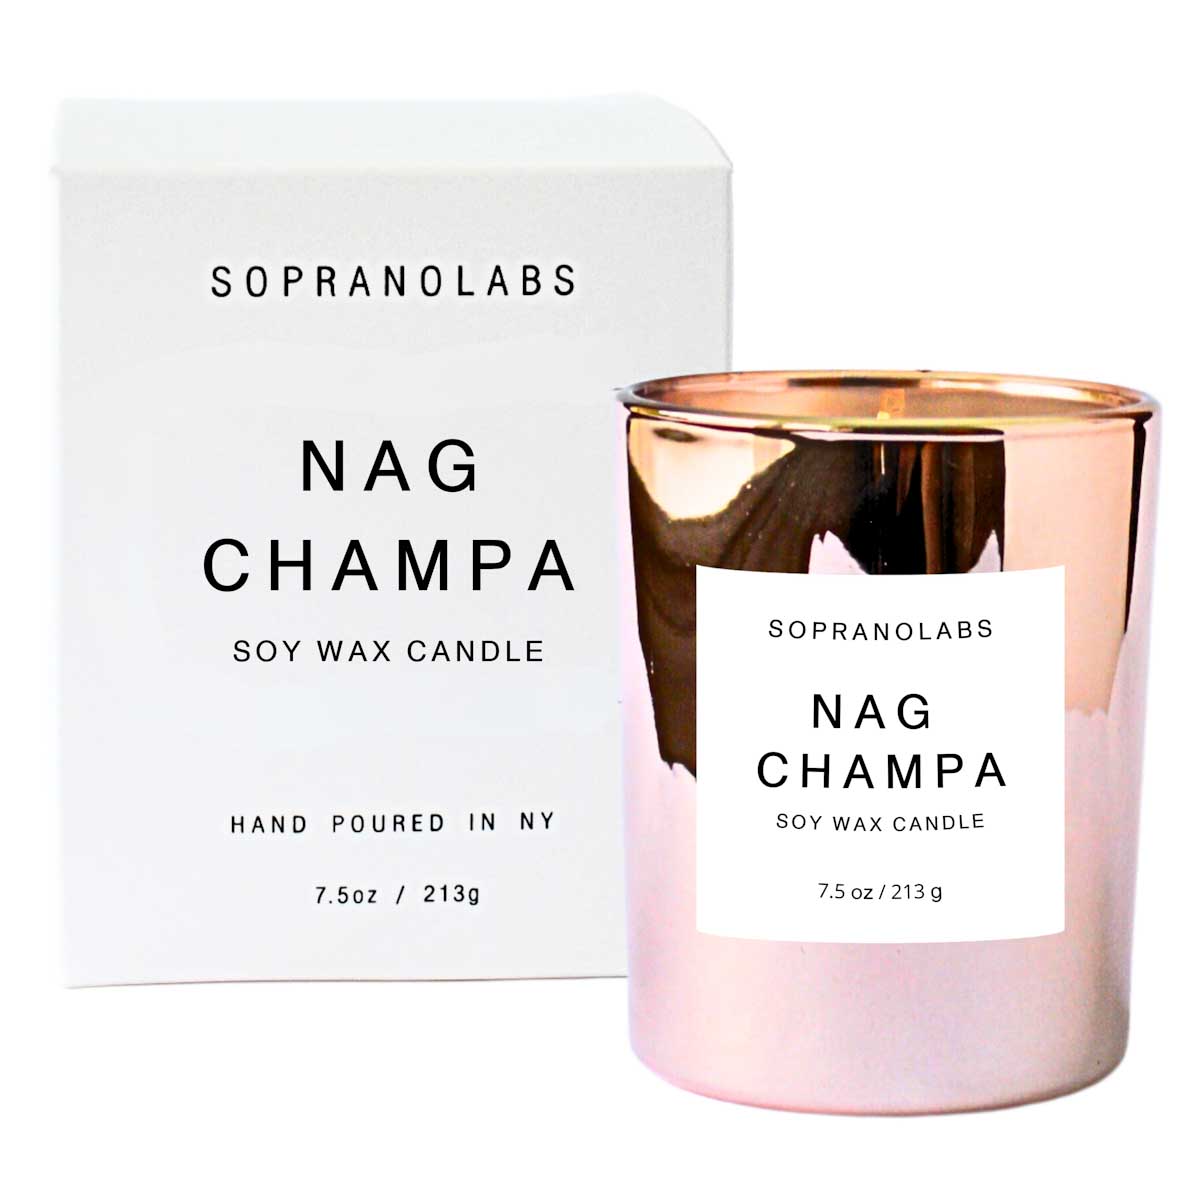 NAG CHAMPA Soy Wax Candle by Sopranolabs